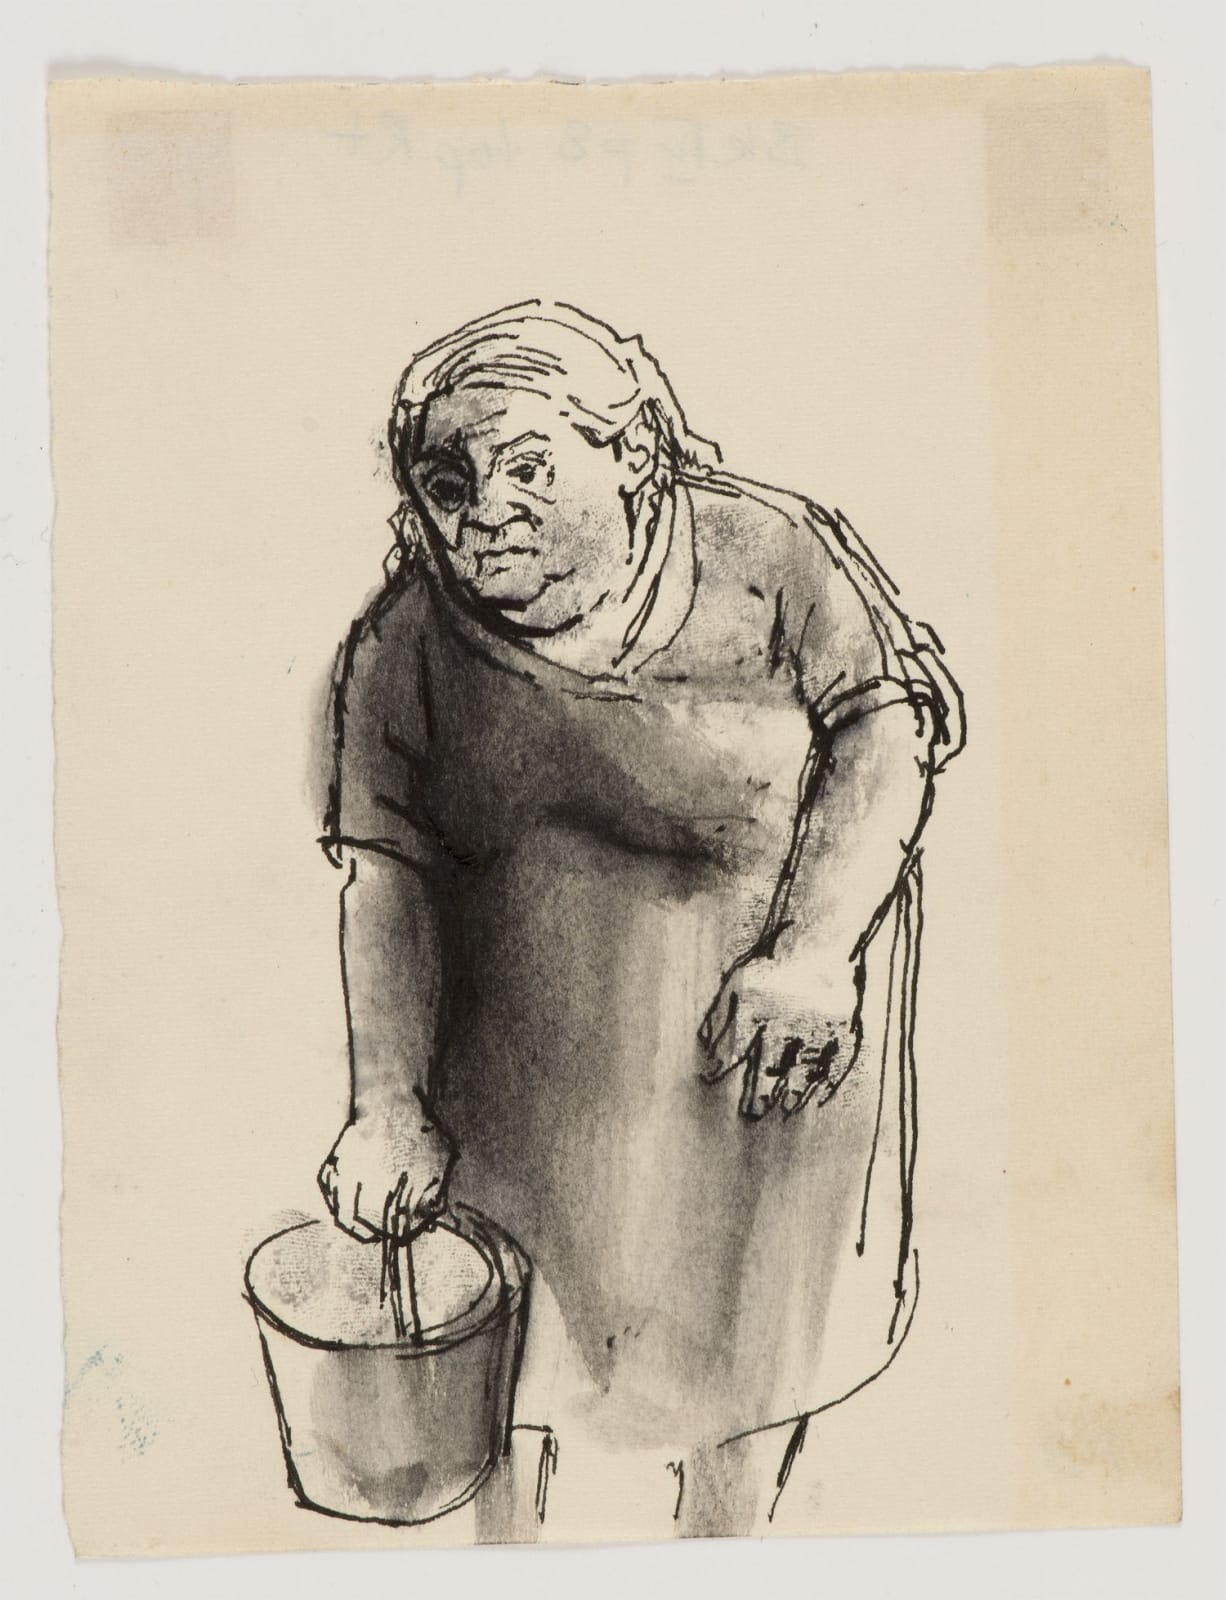 Eva Frankfurther (1930-1959) Woman Cleaner (Series of 8 Sketches from 'Whitechapel Diary') c.1951-58 Pen and ink and wash and charcoal on paper 13.1 x 10 cm Private Collection To see and discover more about this artist click here